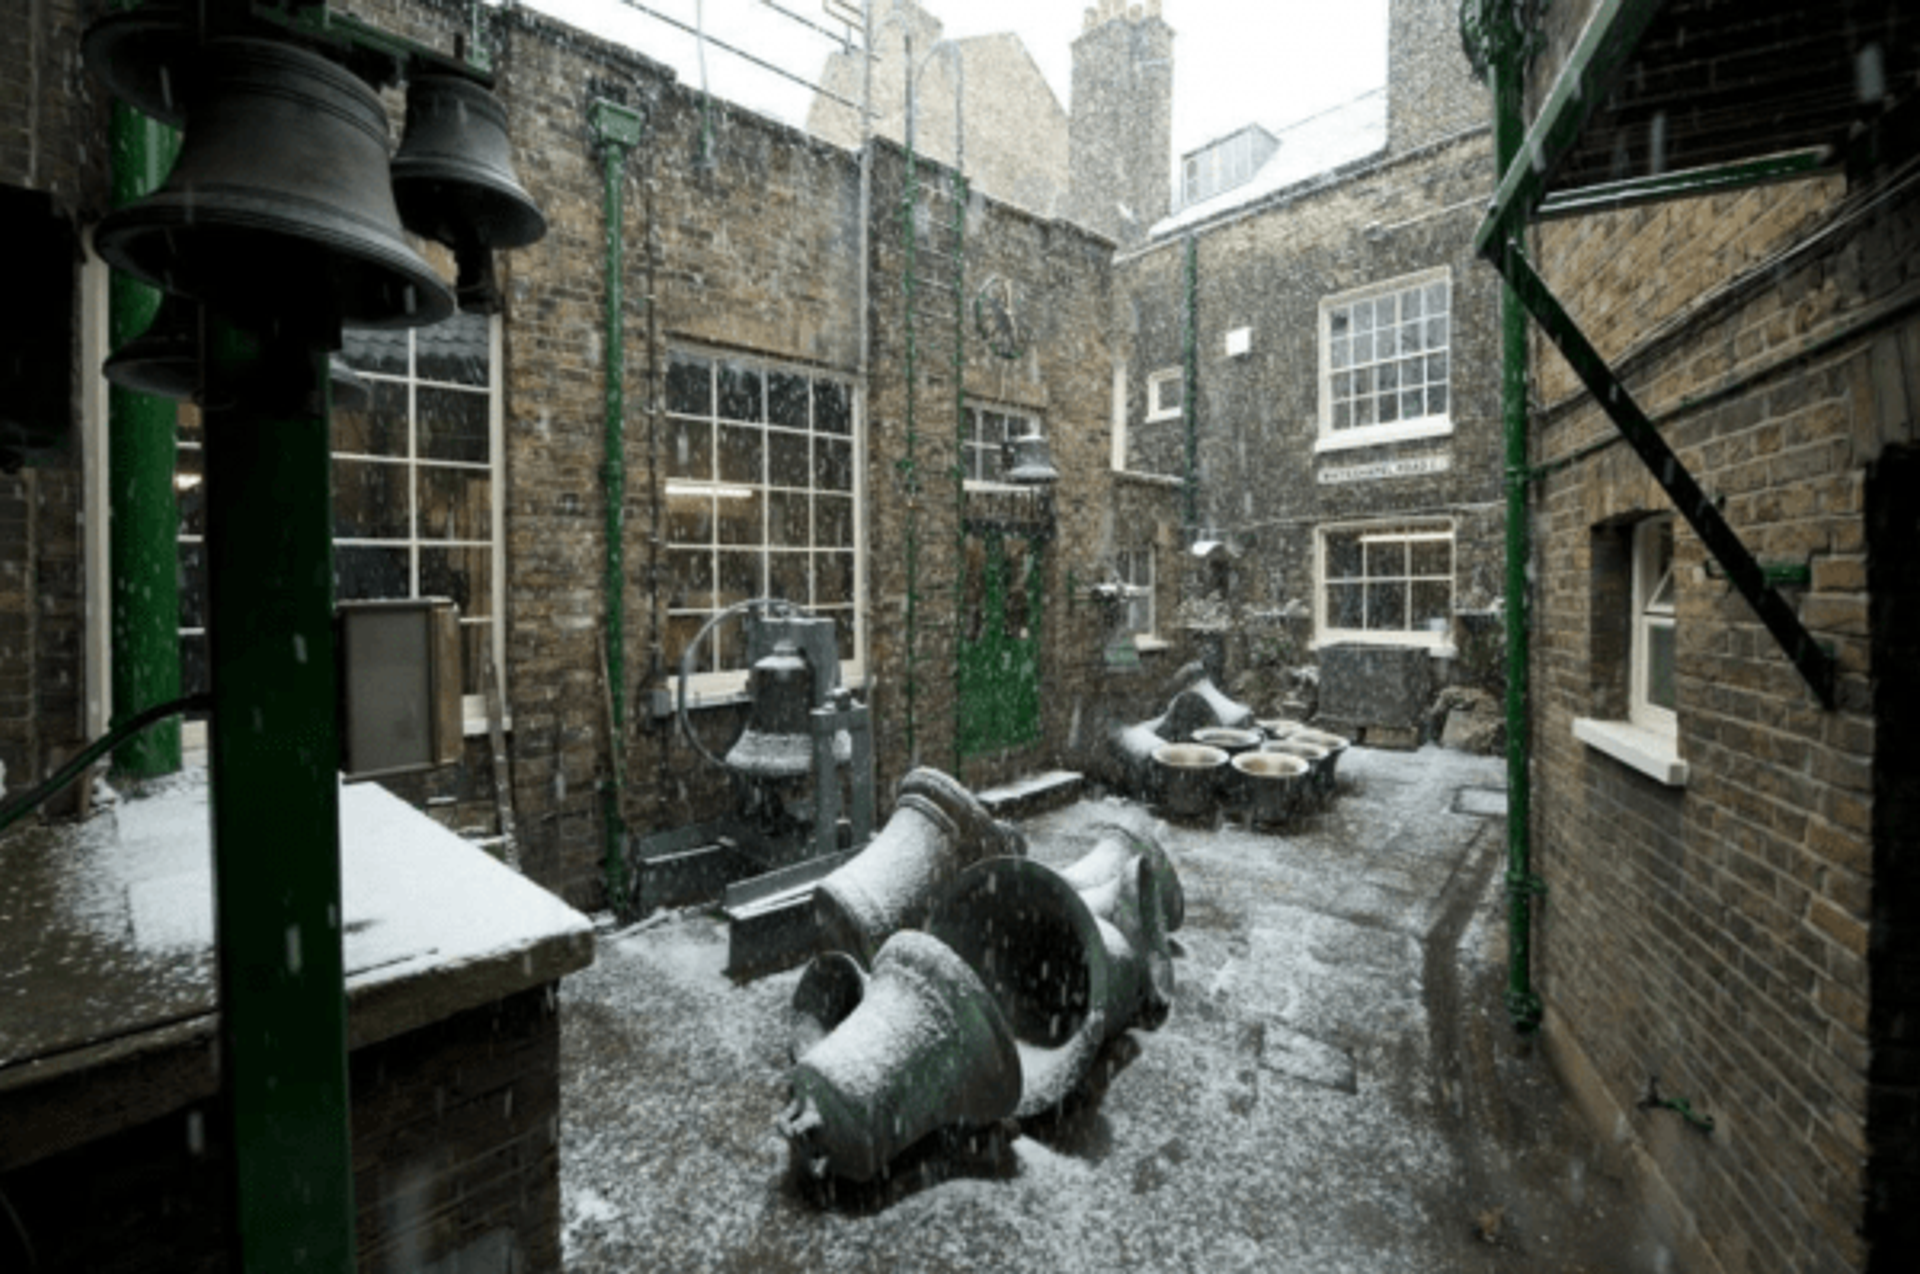 Internal courtyard of the bell foundry in the snow Photo: Derek Kendall